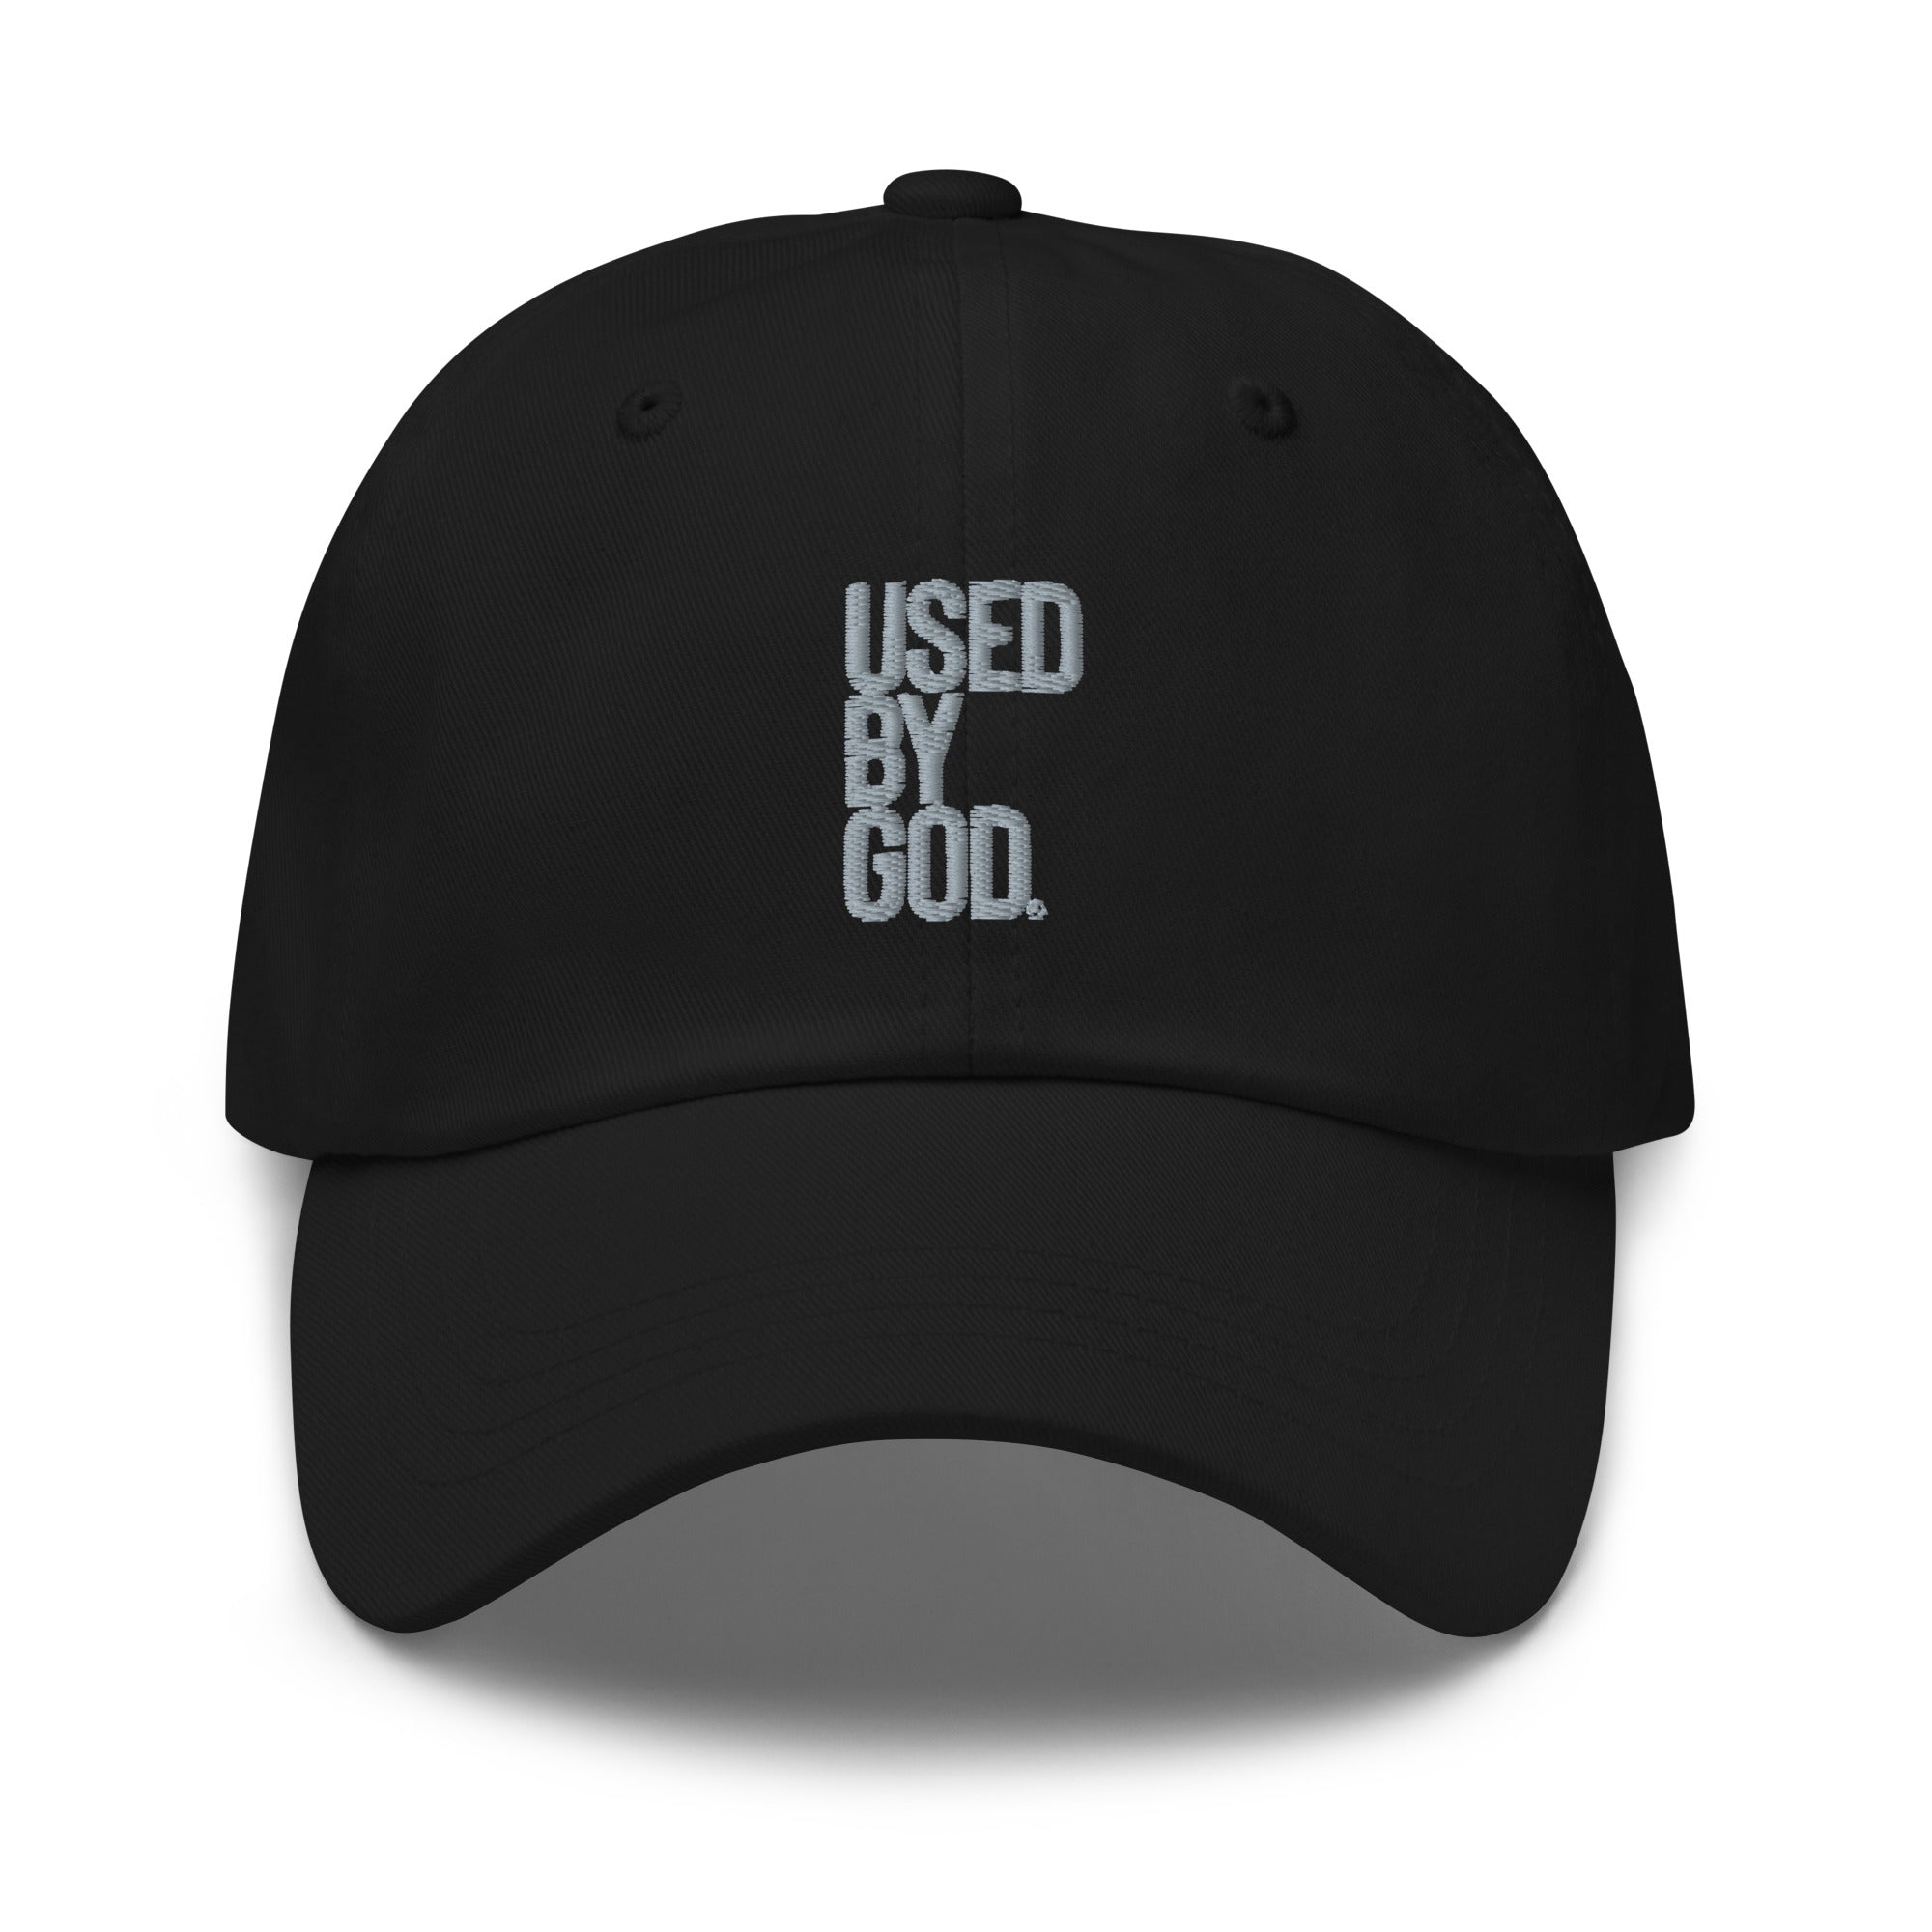 UBG Logo B&B Dad hat, Used By God, Used By God Clothing, Christian Apparel, Christian Hats, Christian T-Shirts, Christian Clothing, God Shirts, Christian Sweatshirts, God Clothing, Jesus Hoodie, Jesus Clothes, God Is Dope, Art Of Homage, Red Letter Clothing, Elevated Faith, Active Faith Sports, Beacon Threads, God The Father Apparel